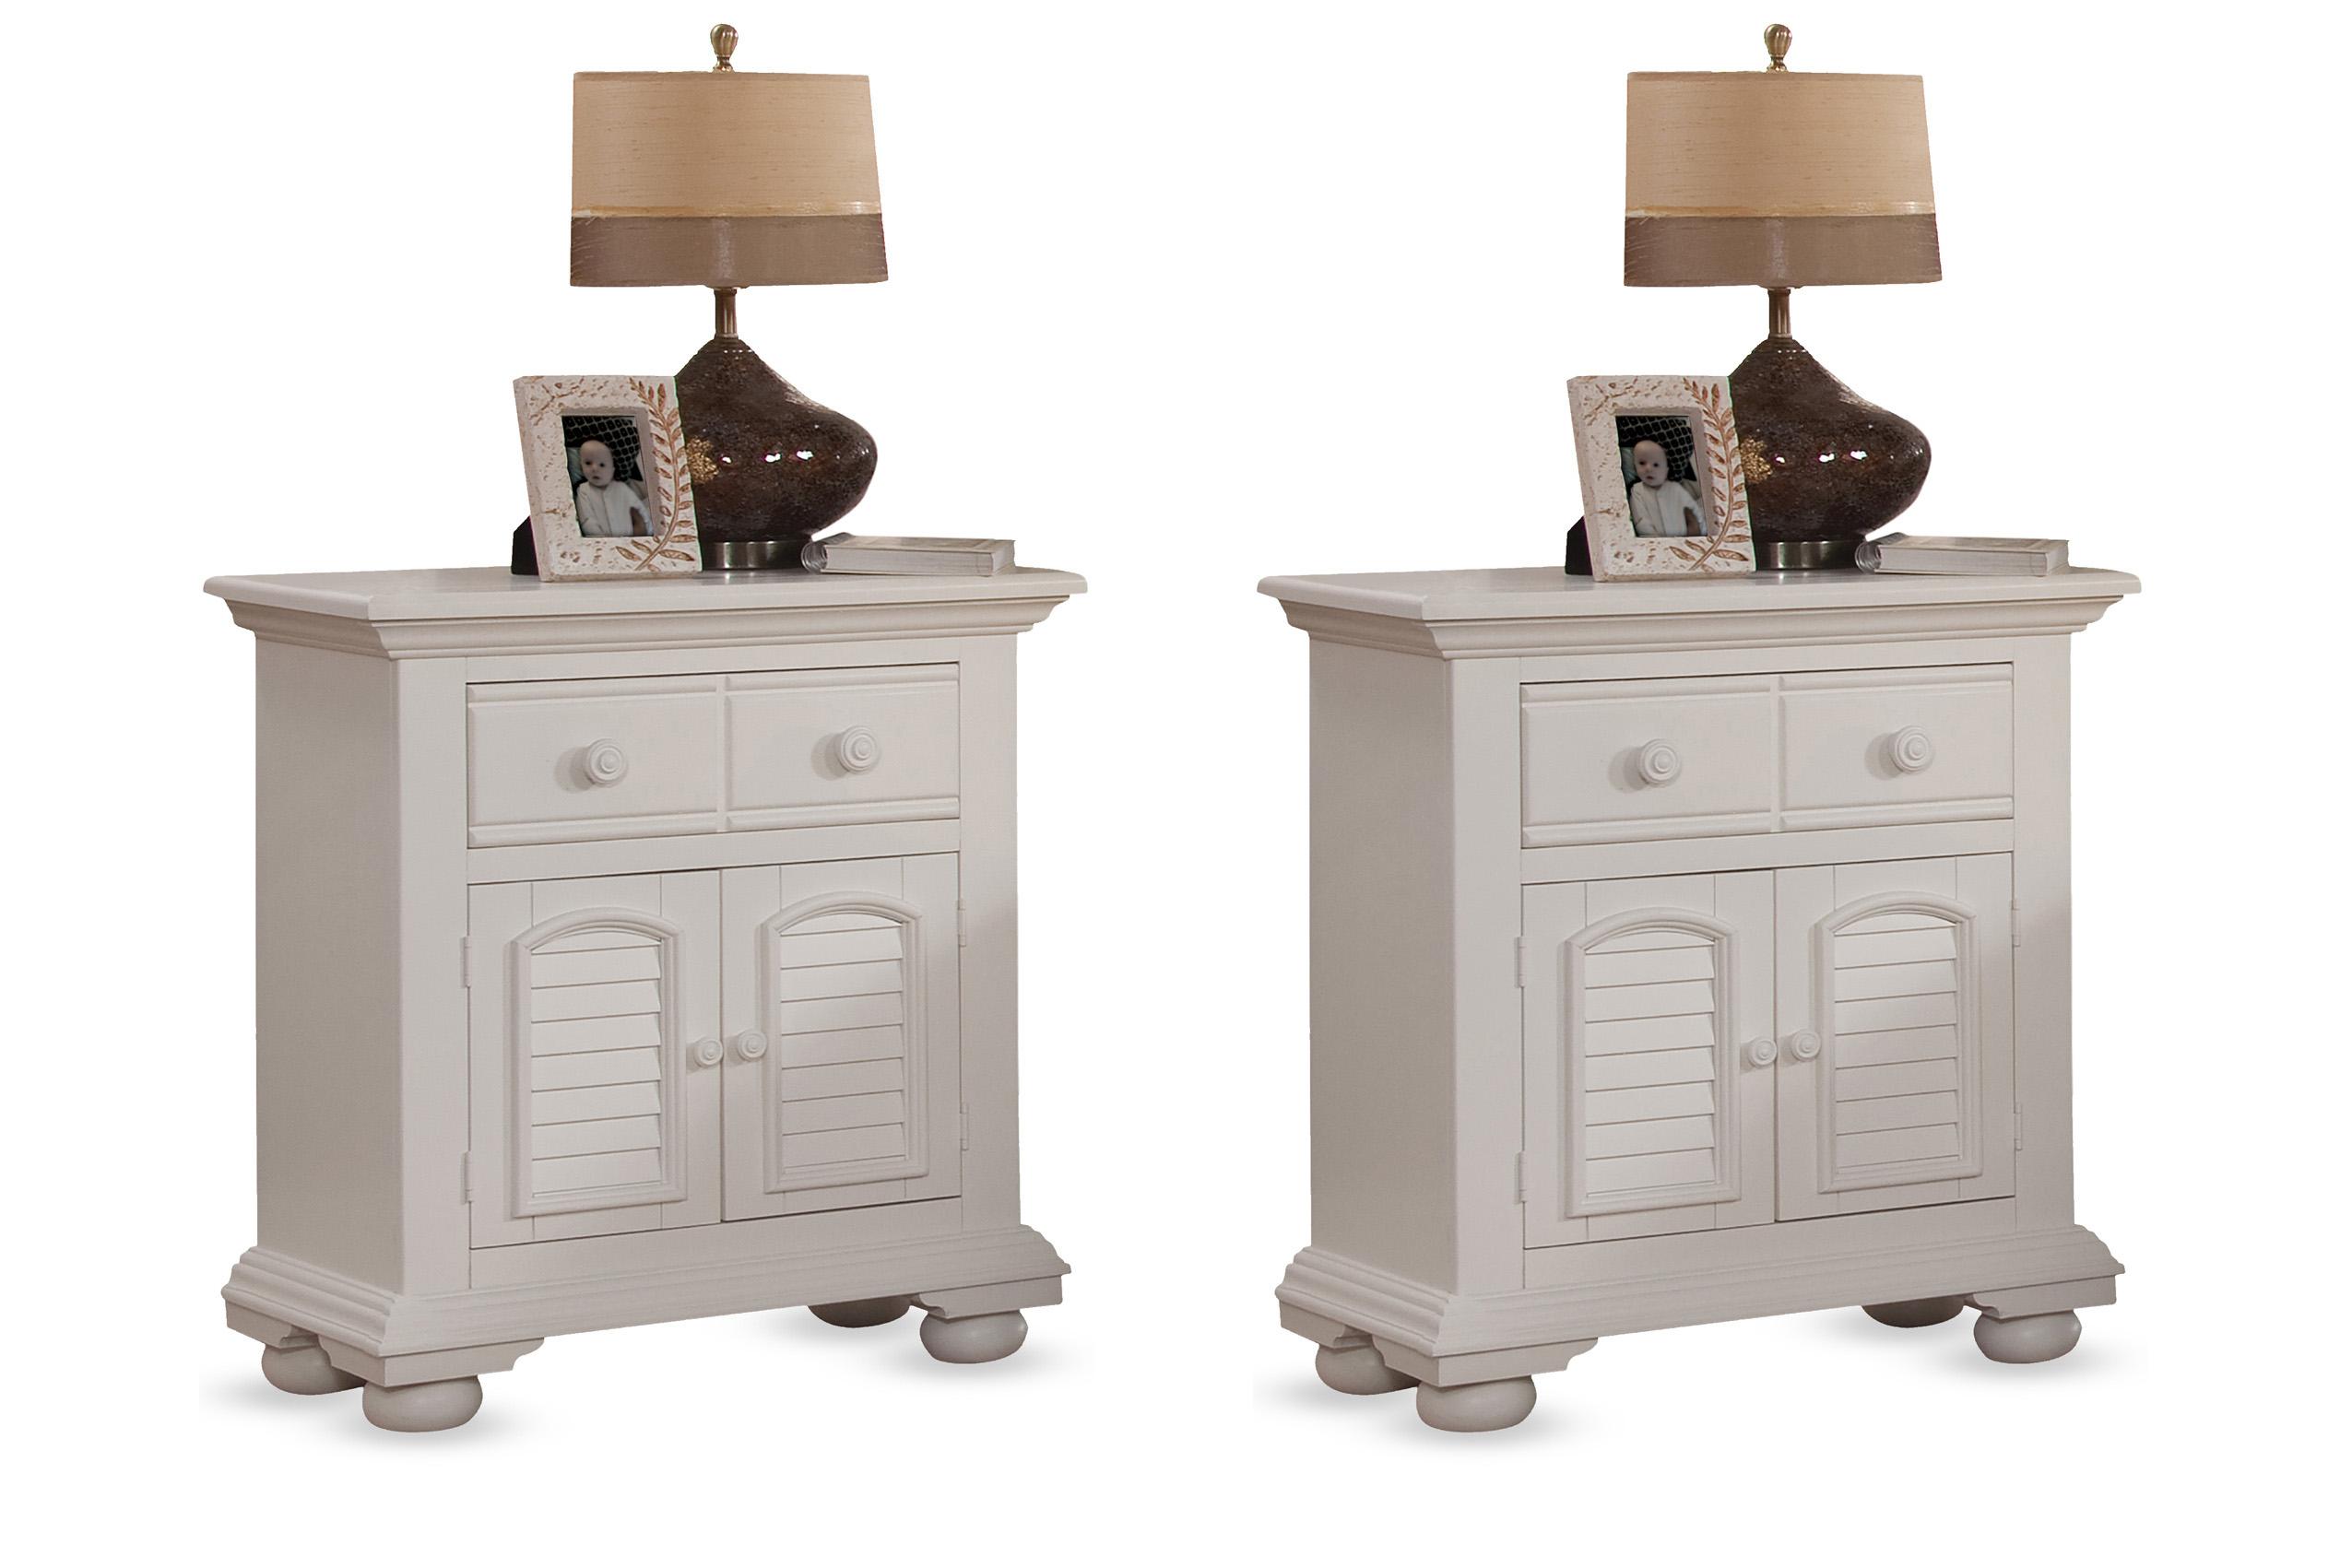 Classic, Traditional, Cottage Nightstand Set COTTAGE 6510-412 6510-412-Set-2 in White 